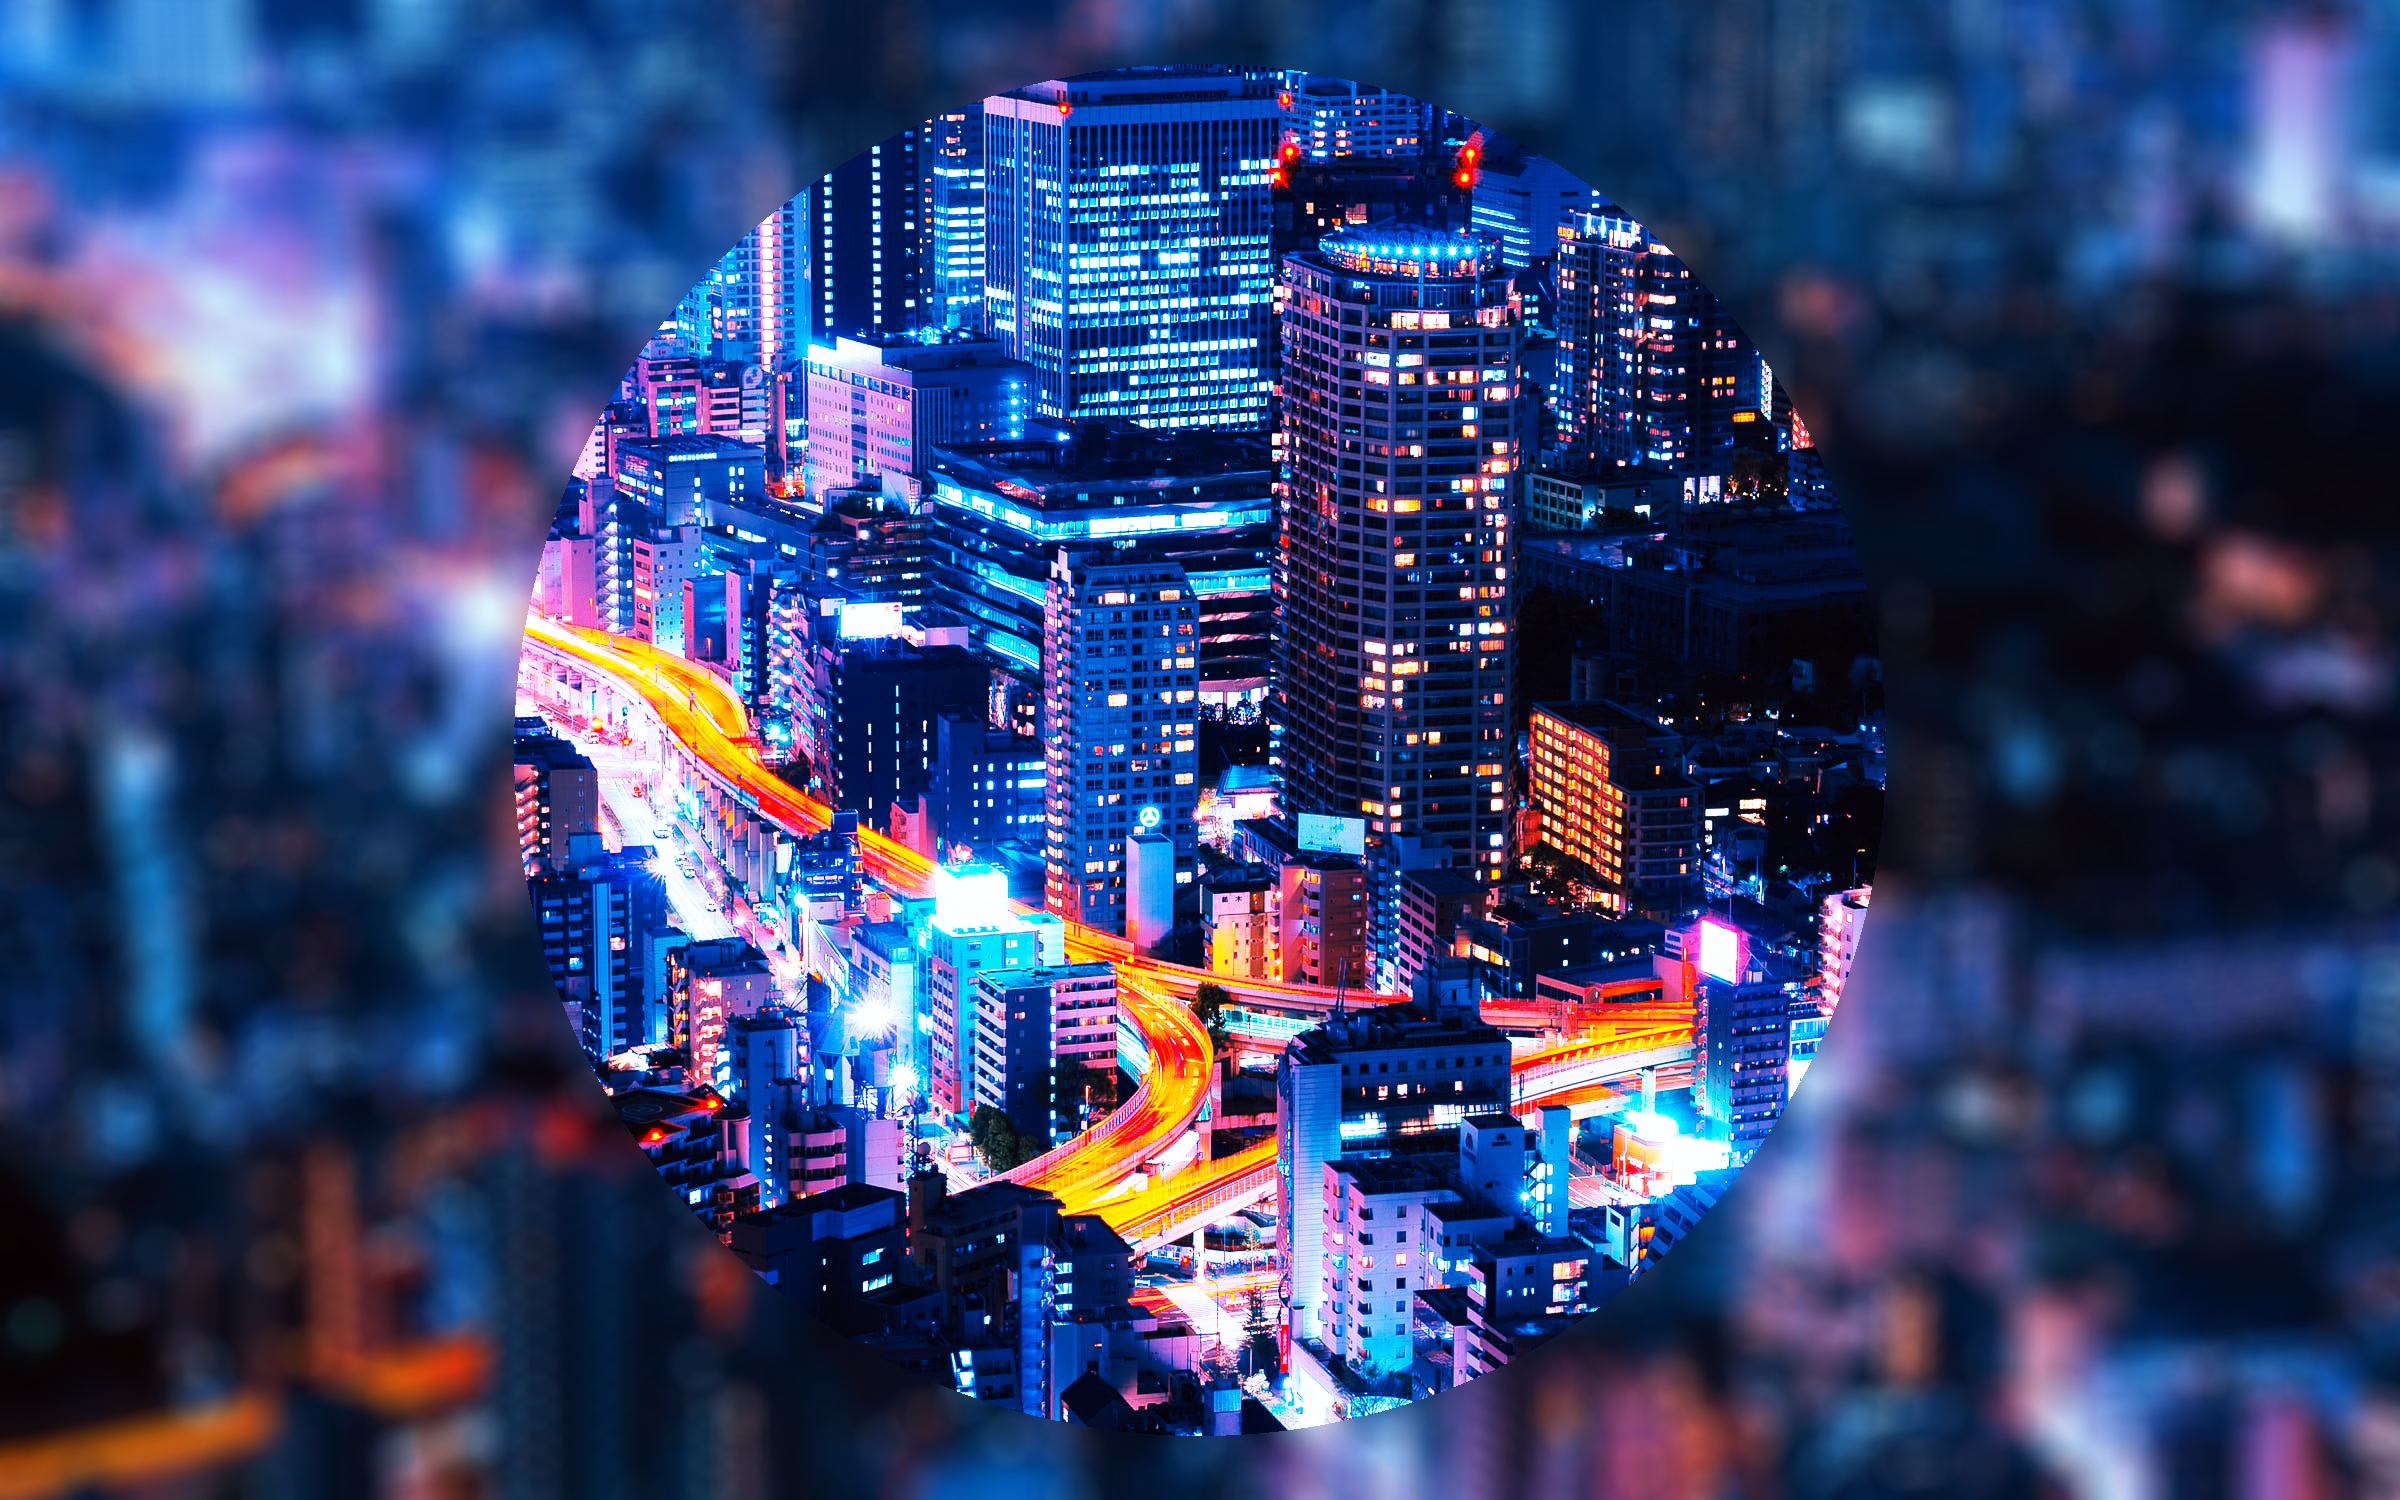 City at night with neon lights